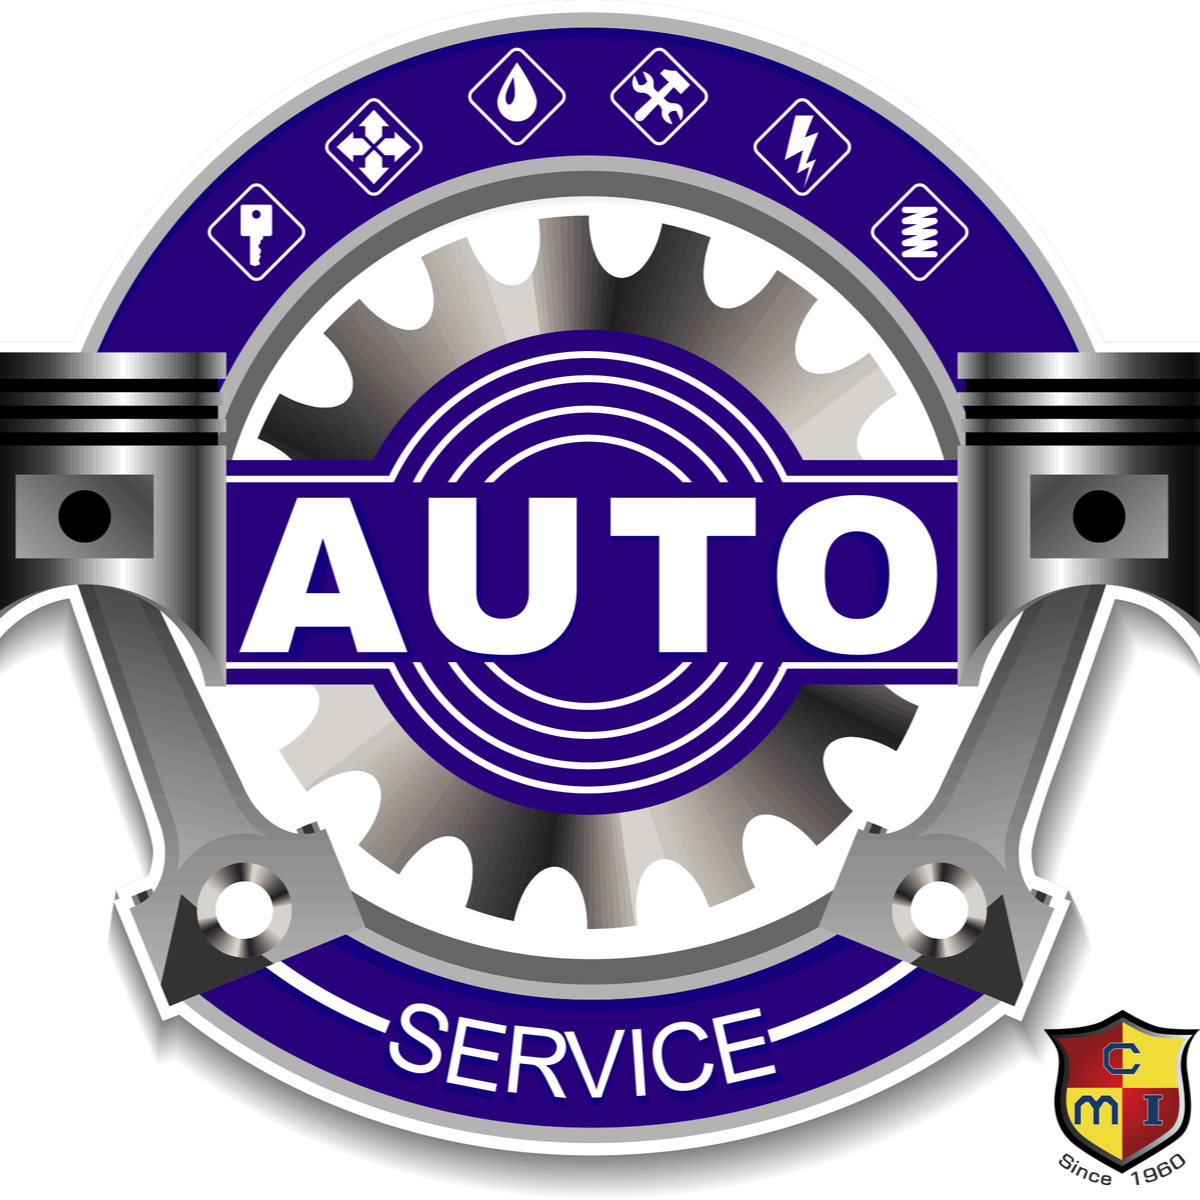 Dependable Services and Auto Repair in Bothell